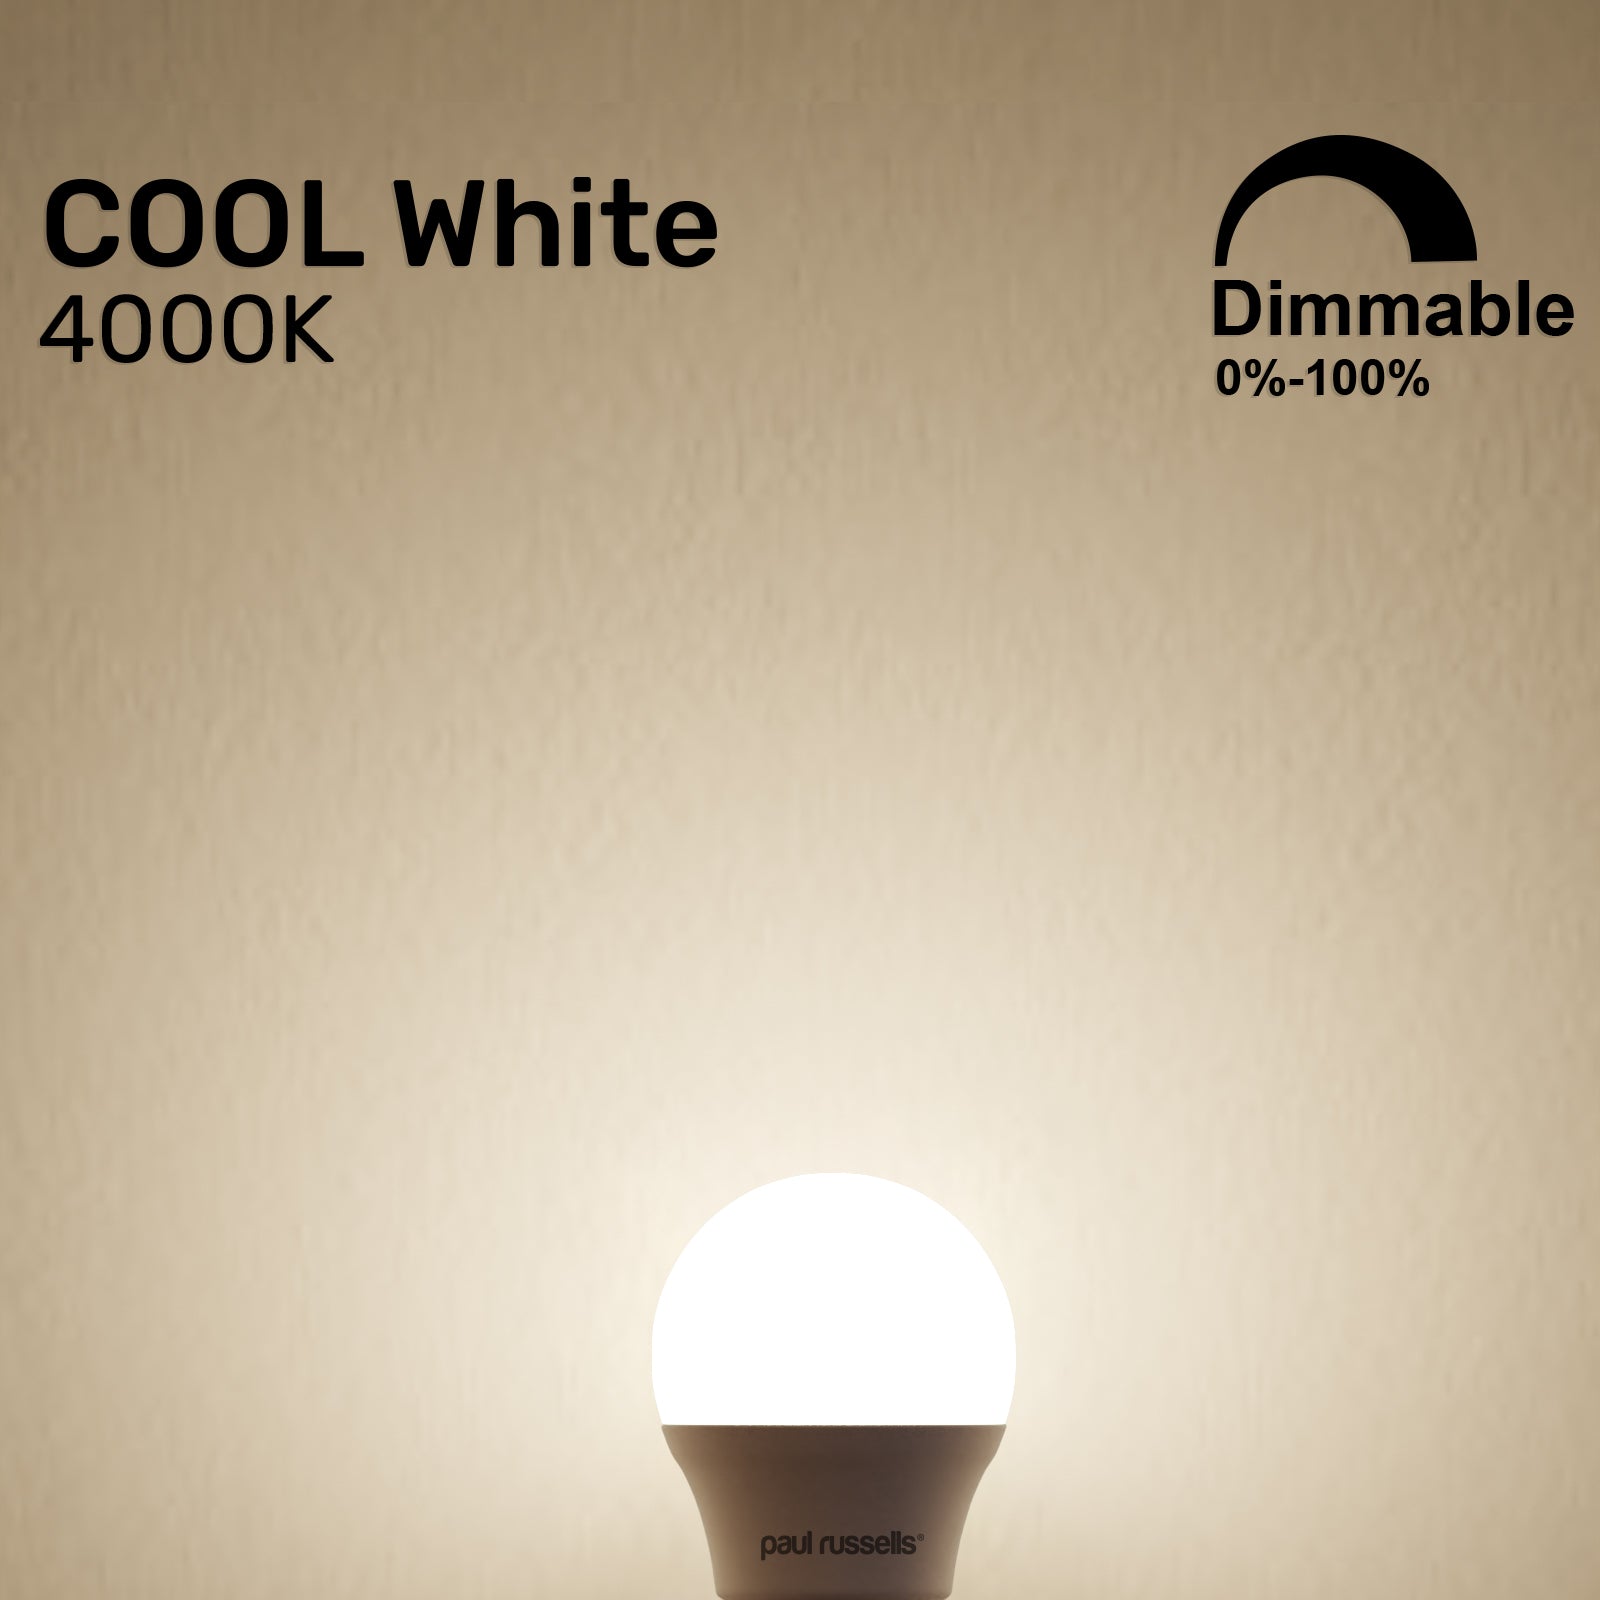 LED Dimmable Golf 5.5W=40W Cool White Small Edison Screw SES E14 Bulbs